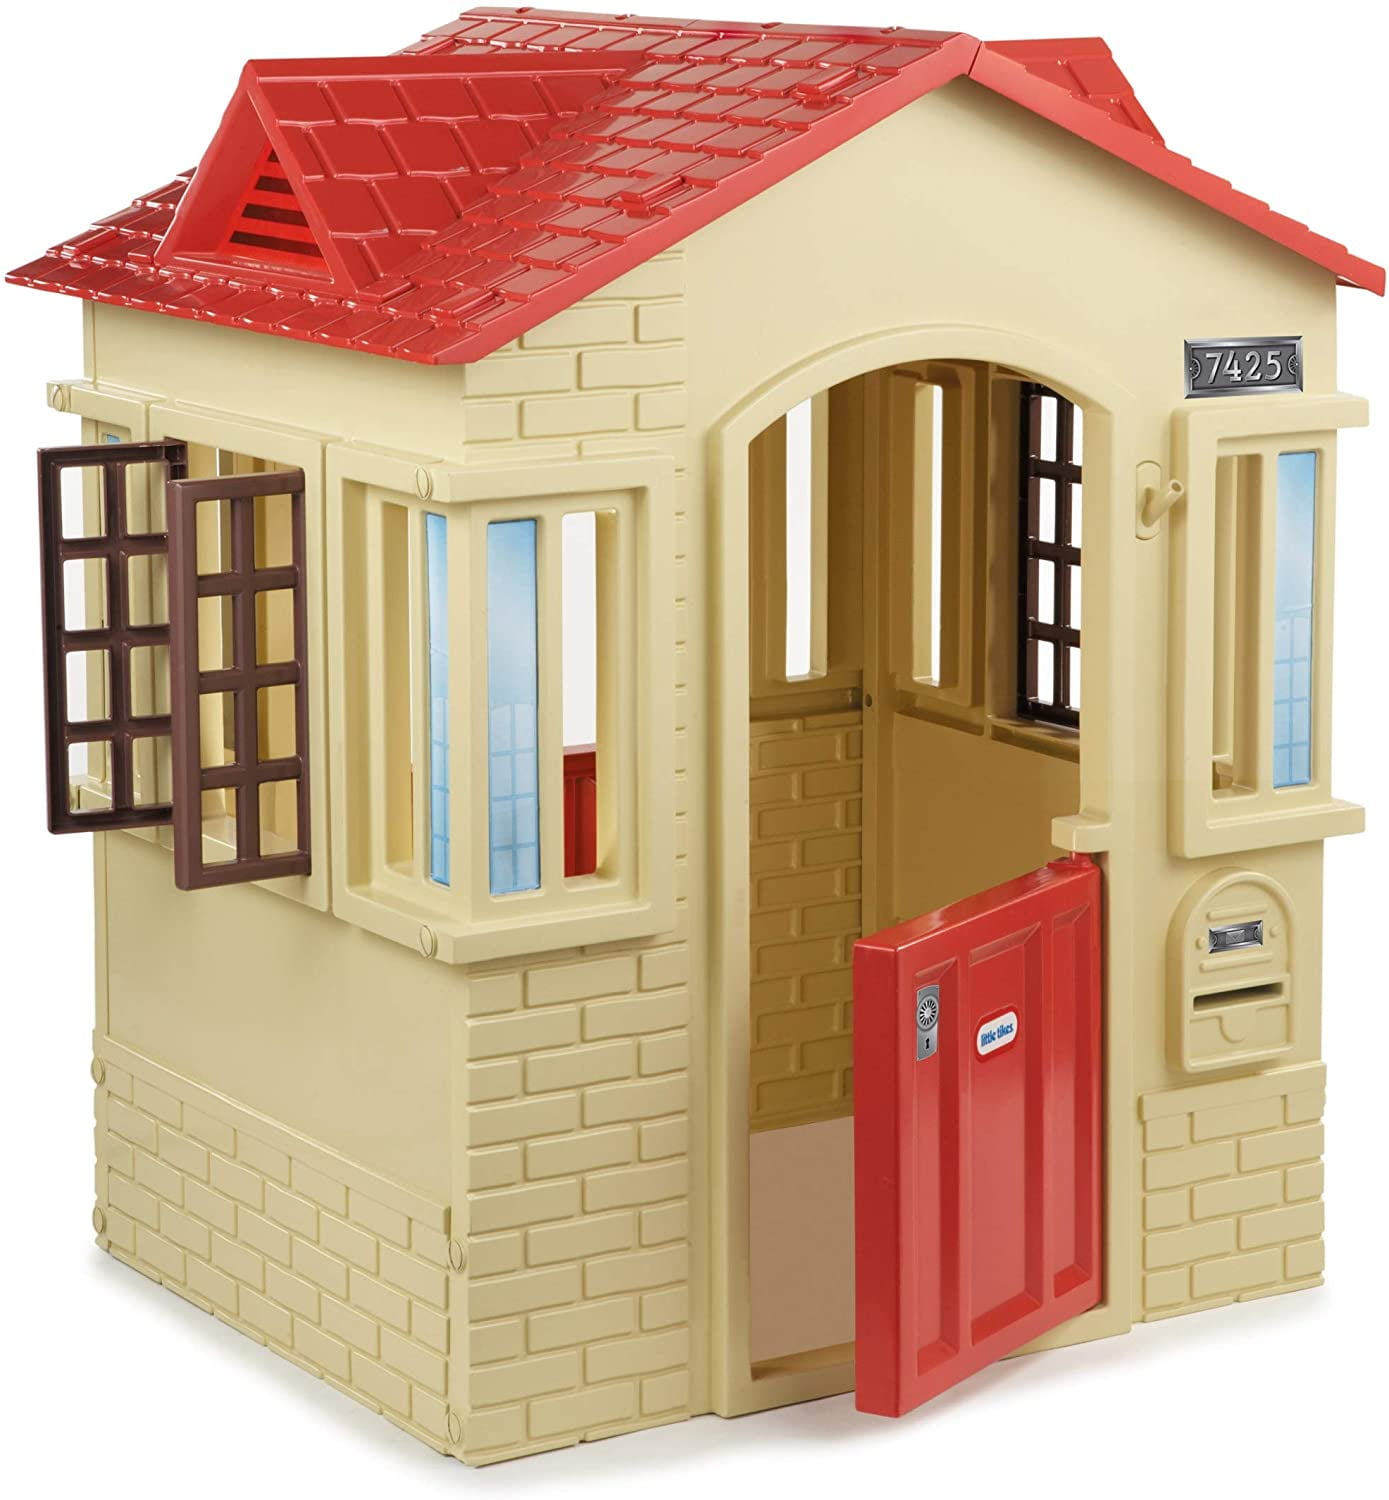 Details about   Kids Indoor Outdoor Plastic Playhouse House Pretend Play Garden Home Yard Child 